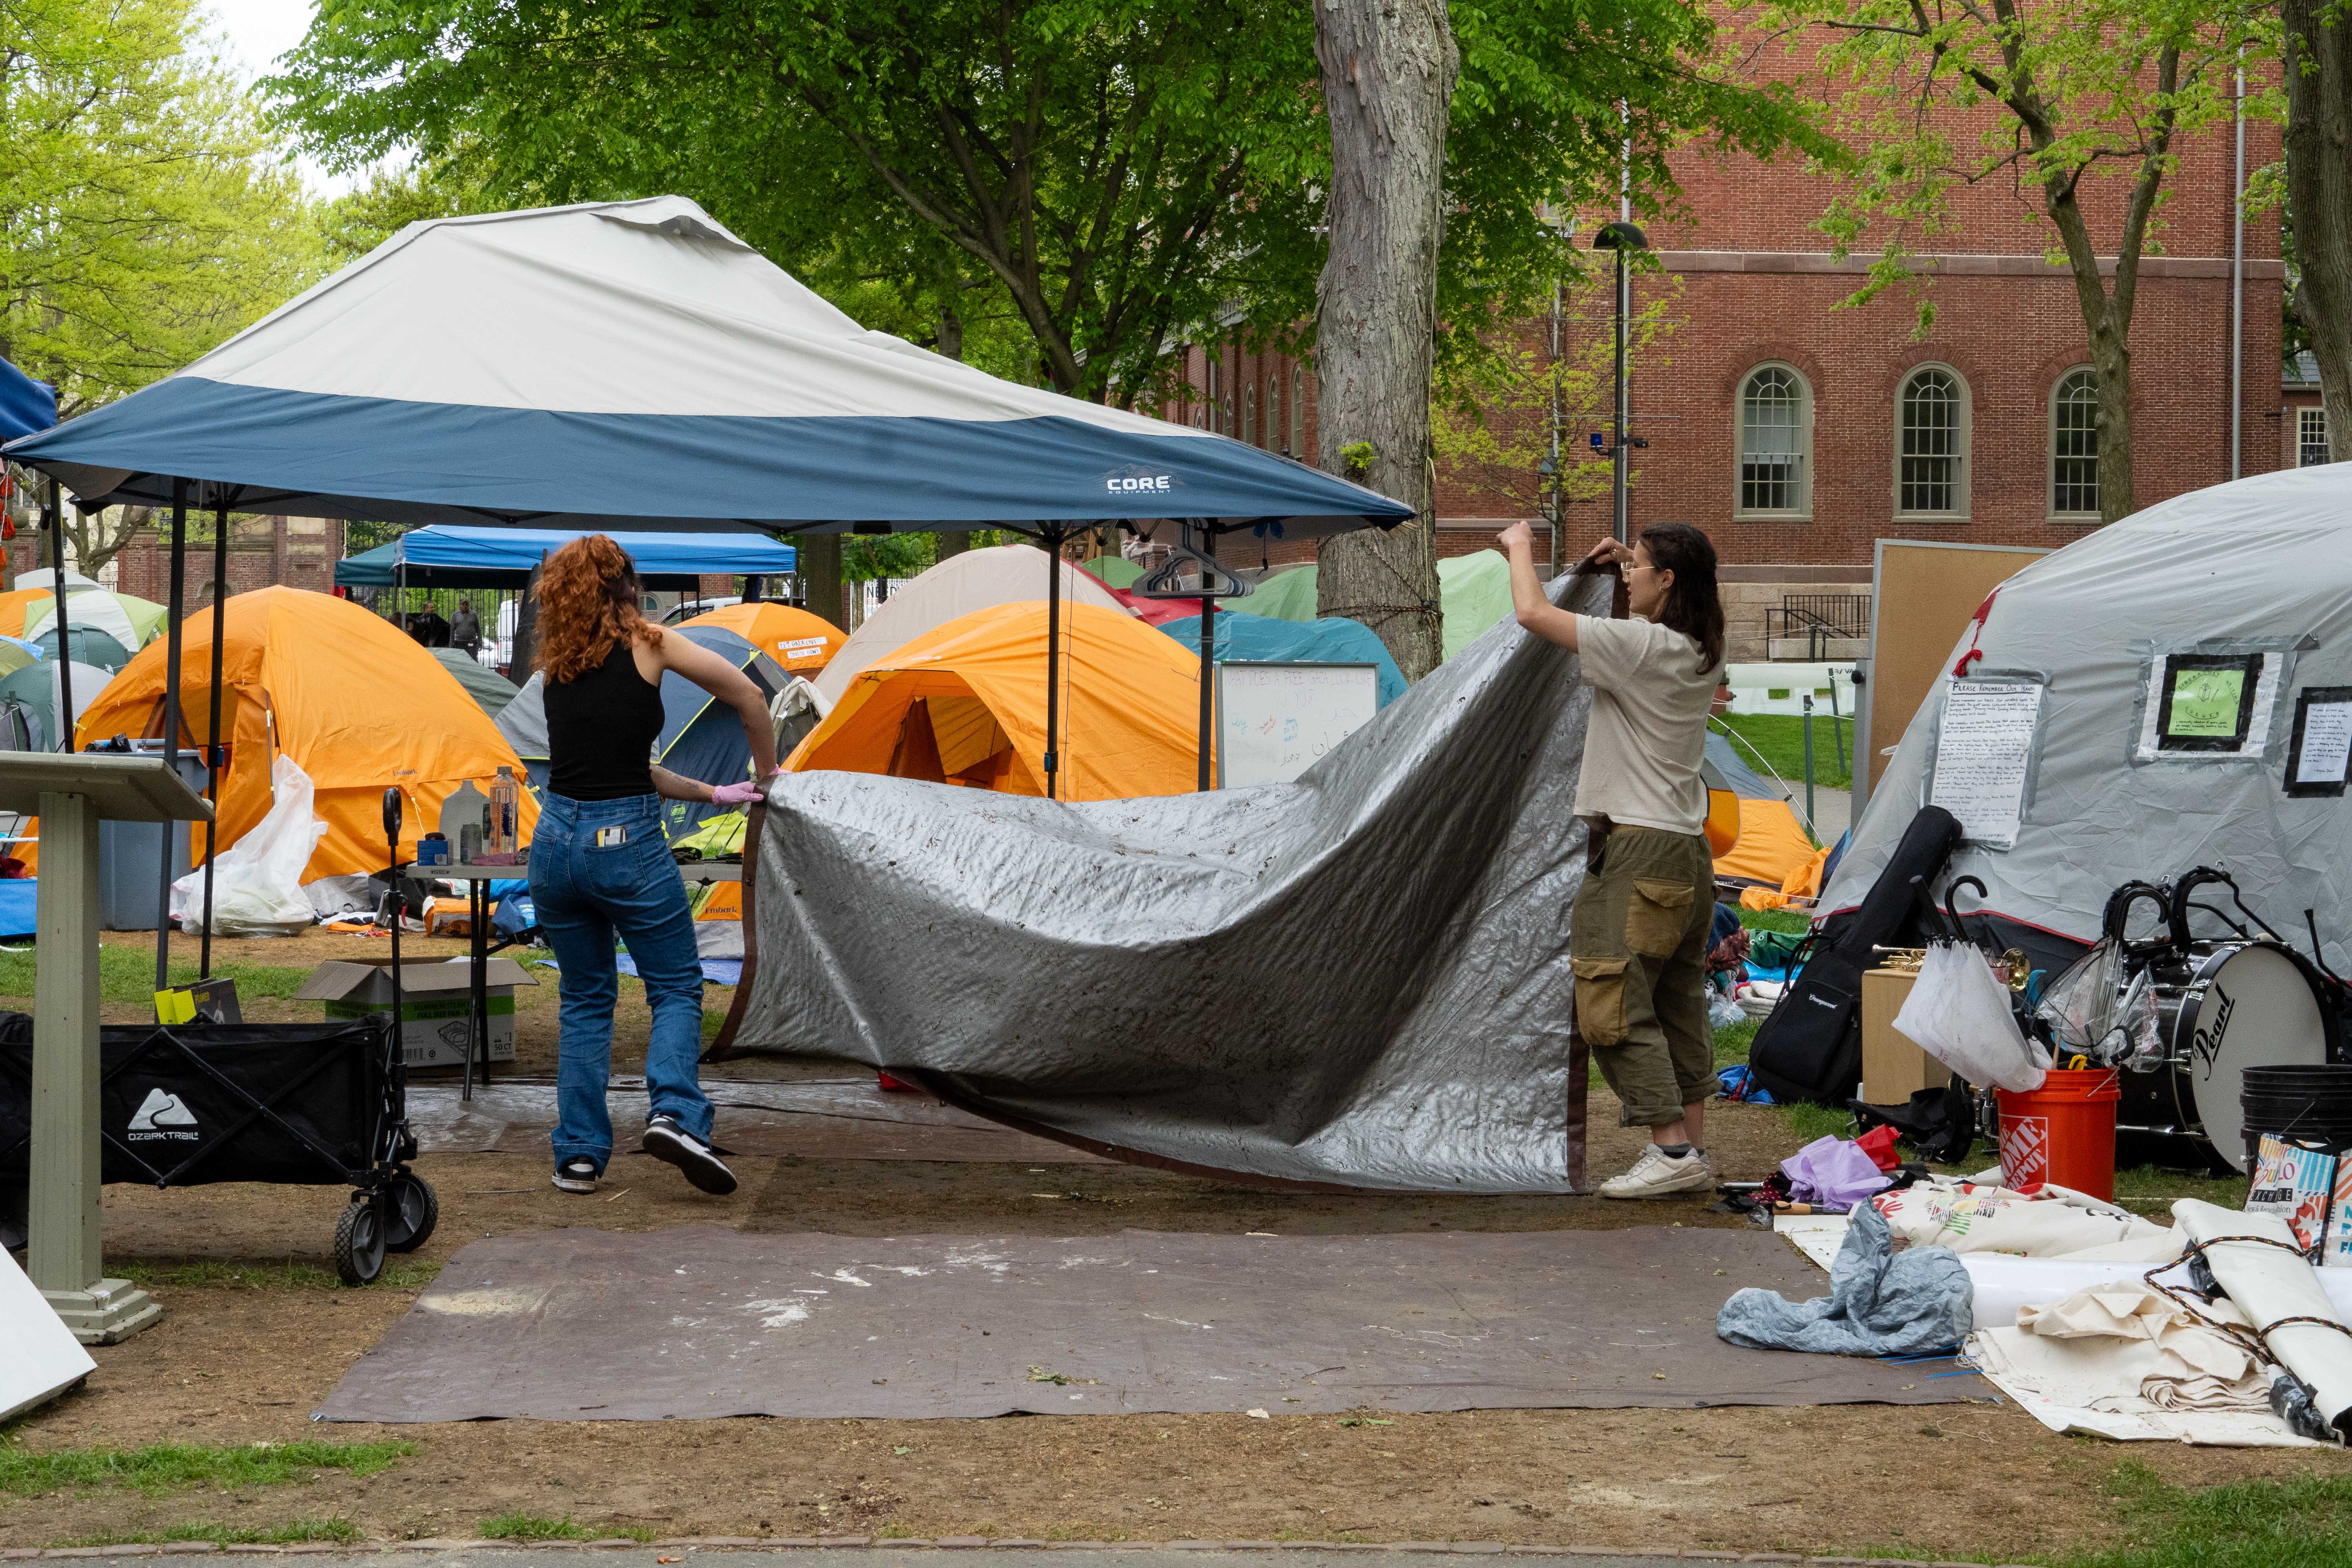 Protesters dismantle the Harvard Yard encampment after Harvard Out of Occupied Palestine announced they had reached an agreement with the University to end the encampment in exchange for reversing involuntary leaves of absence and holding conversations with University leadership around divestment. The end of the encampment paved the way for Commencement to proceed as planned.